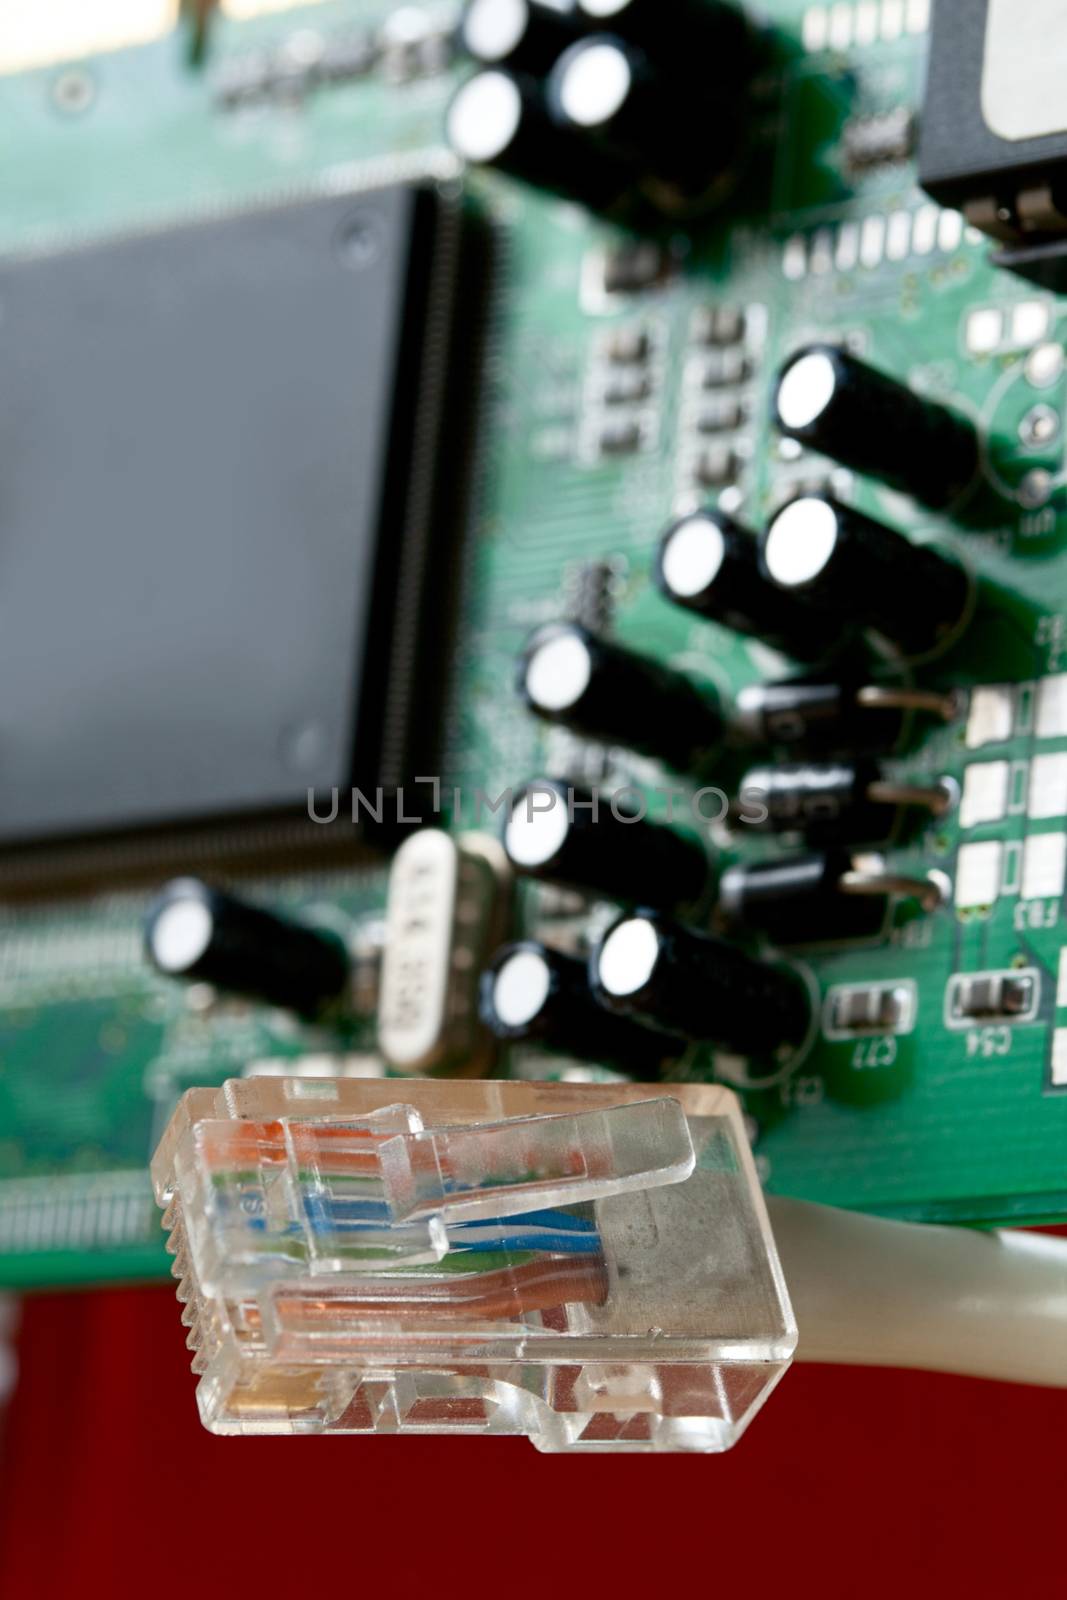 Ethernet cable and motherboard detail by Garsya